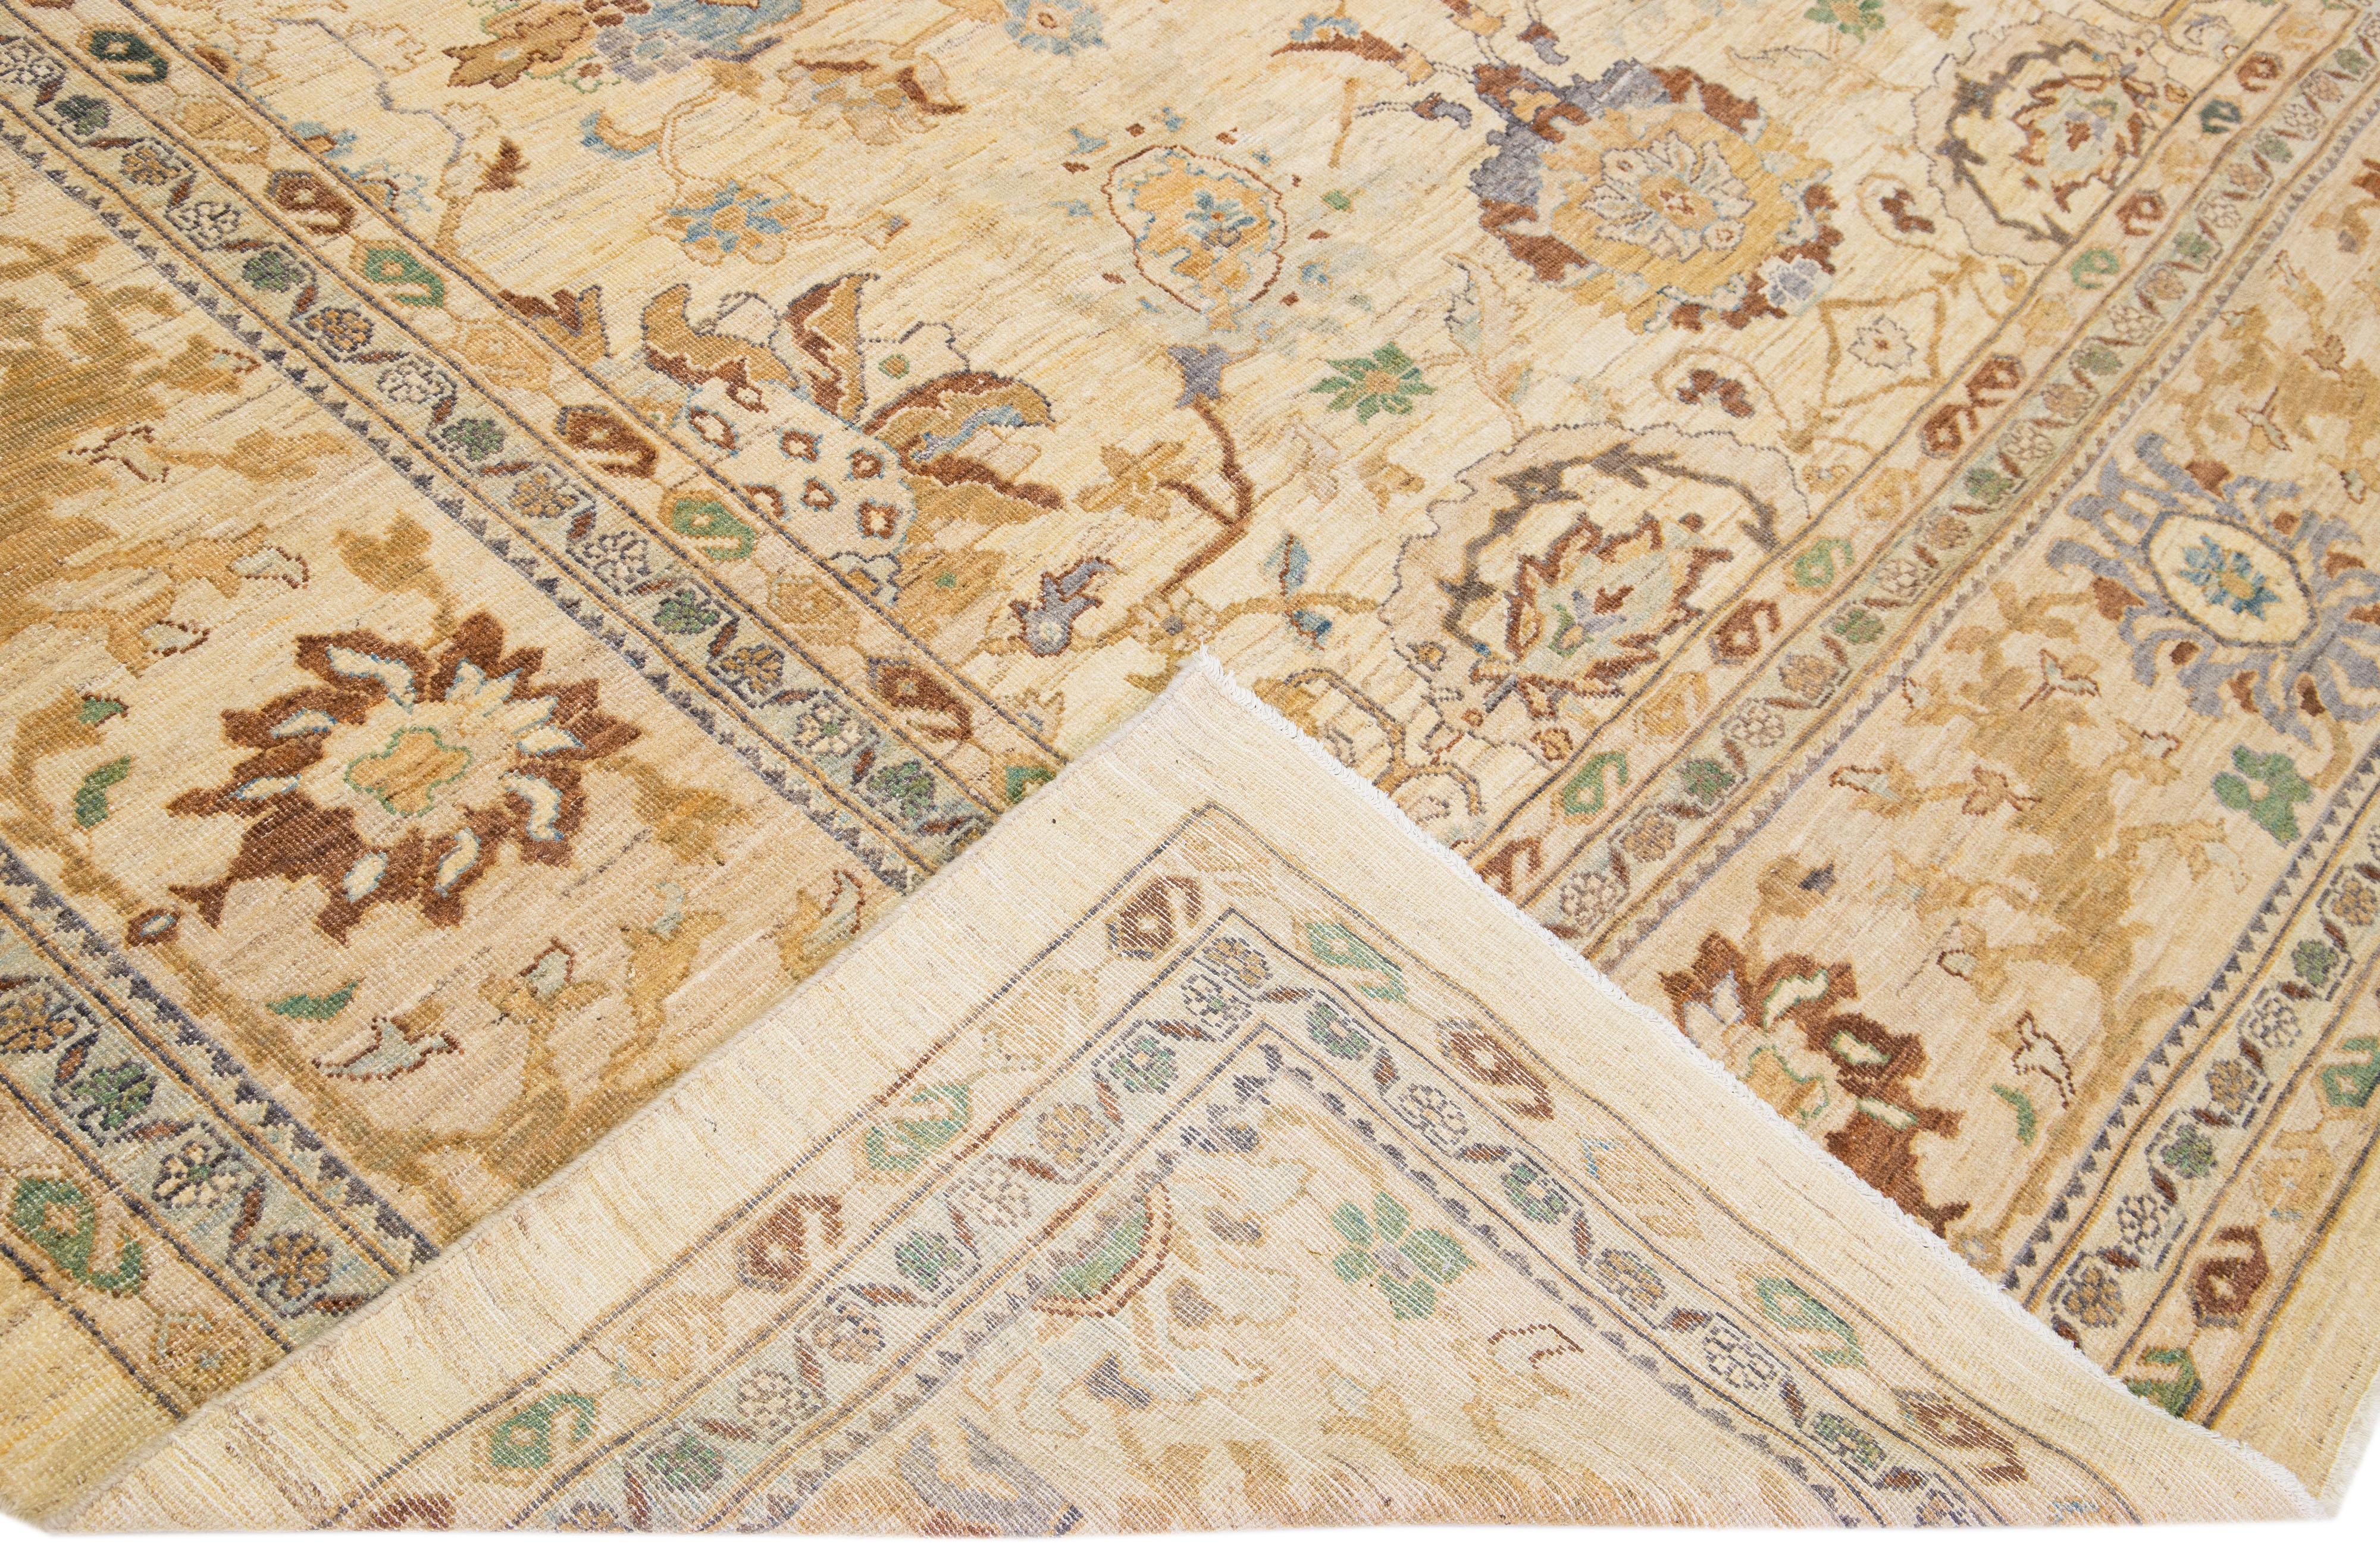 Beautiful modern Sultanabad hand-knotted wool rug with a beige color field. This rug has green, brown, and gray accents in a gorgeous all-over floral design.

This rug measures: 12'3